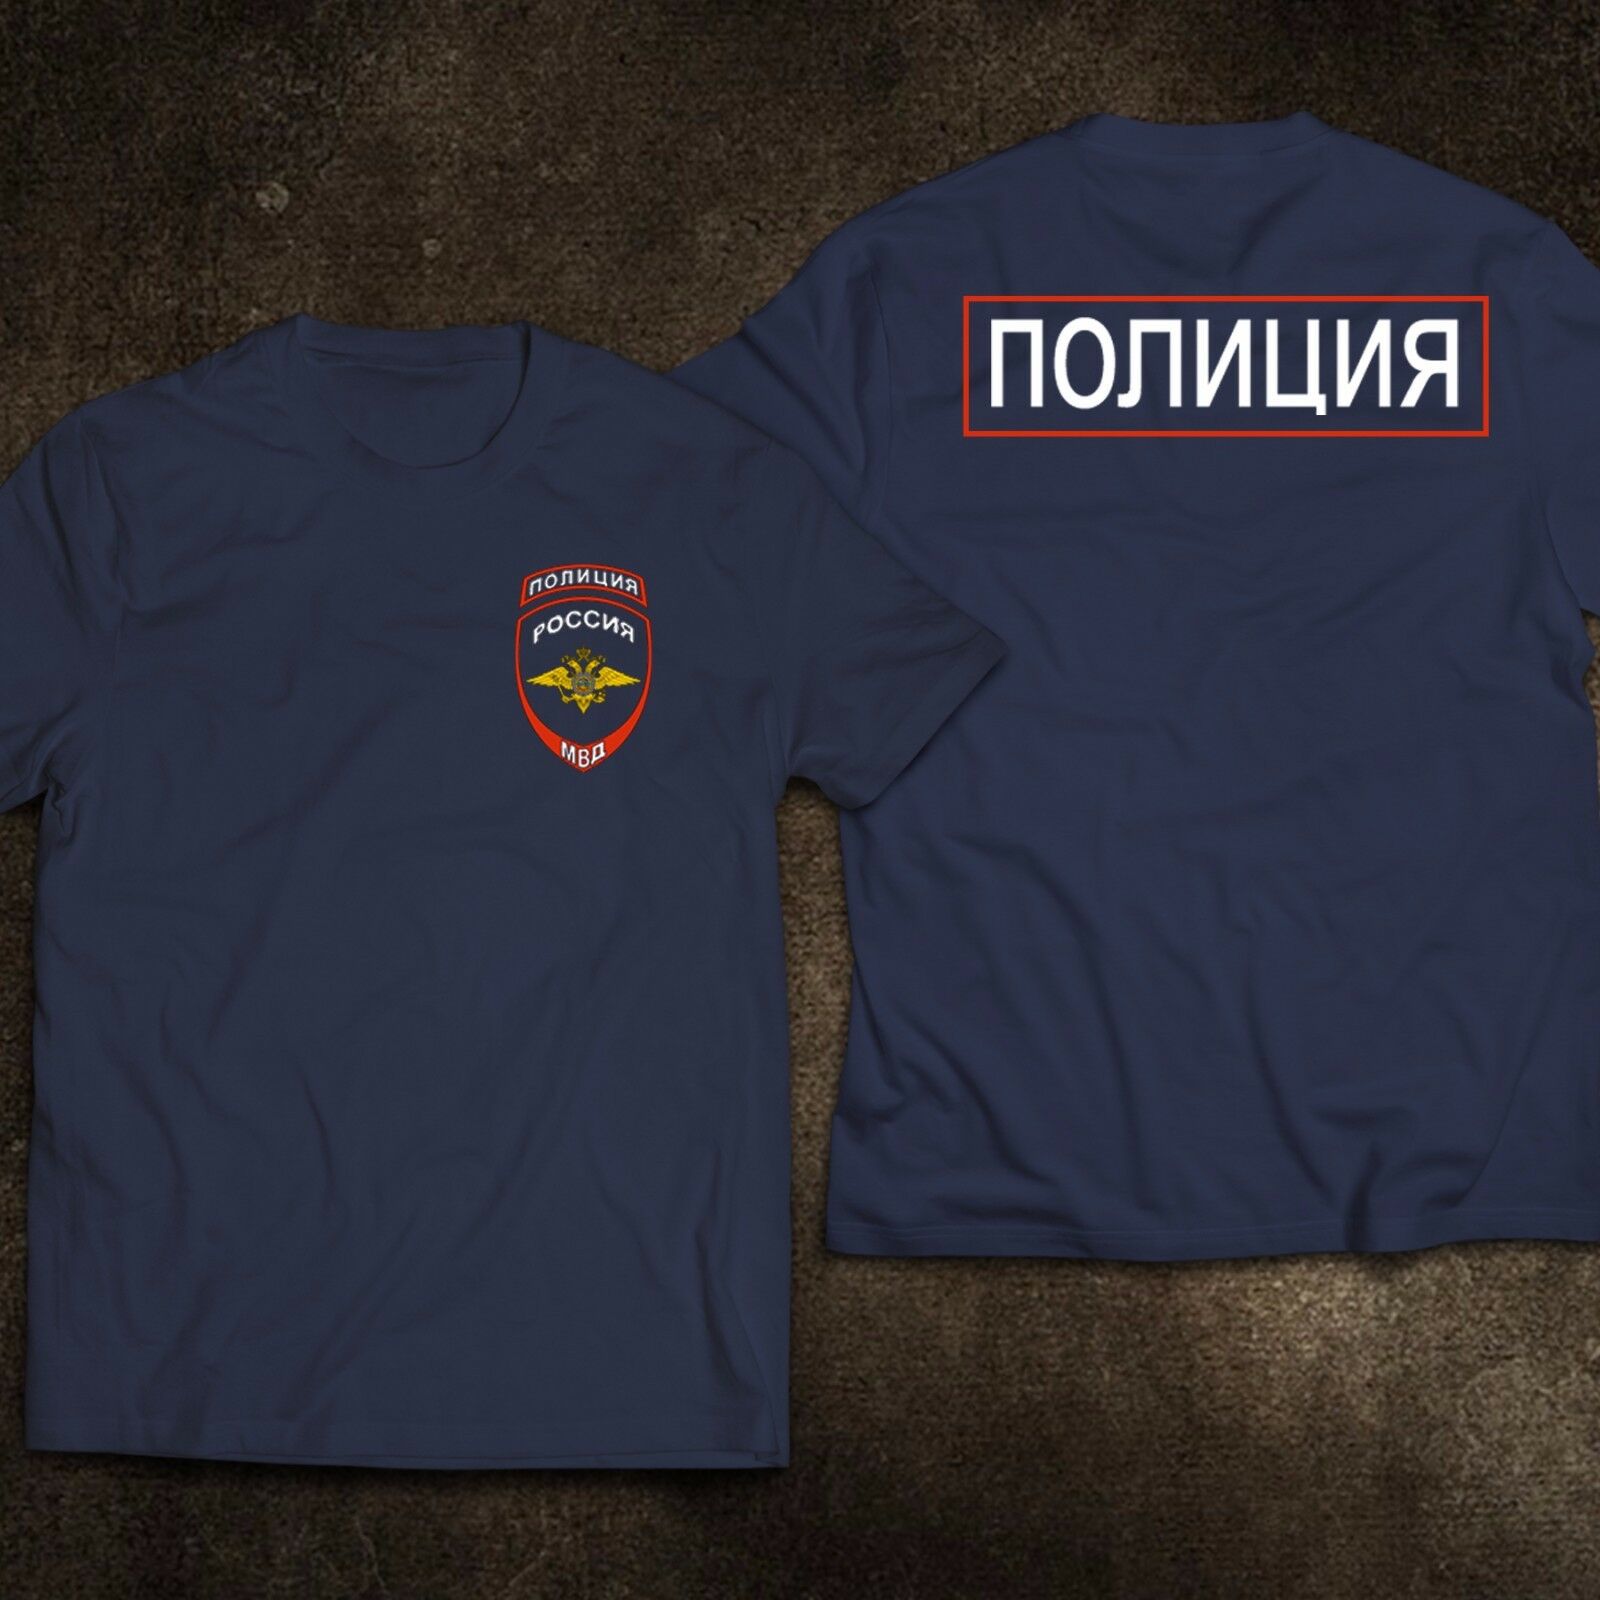 Russia Moscow Russian Police Security Department Service MVD T-Shirt. Summer Cotton Short Sleeve O-Neck Mens T Shirt New S-3XL